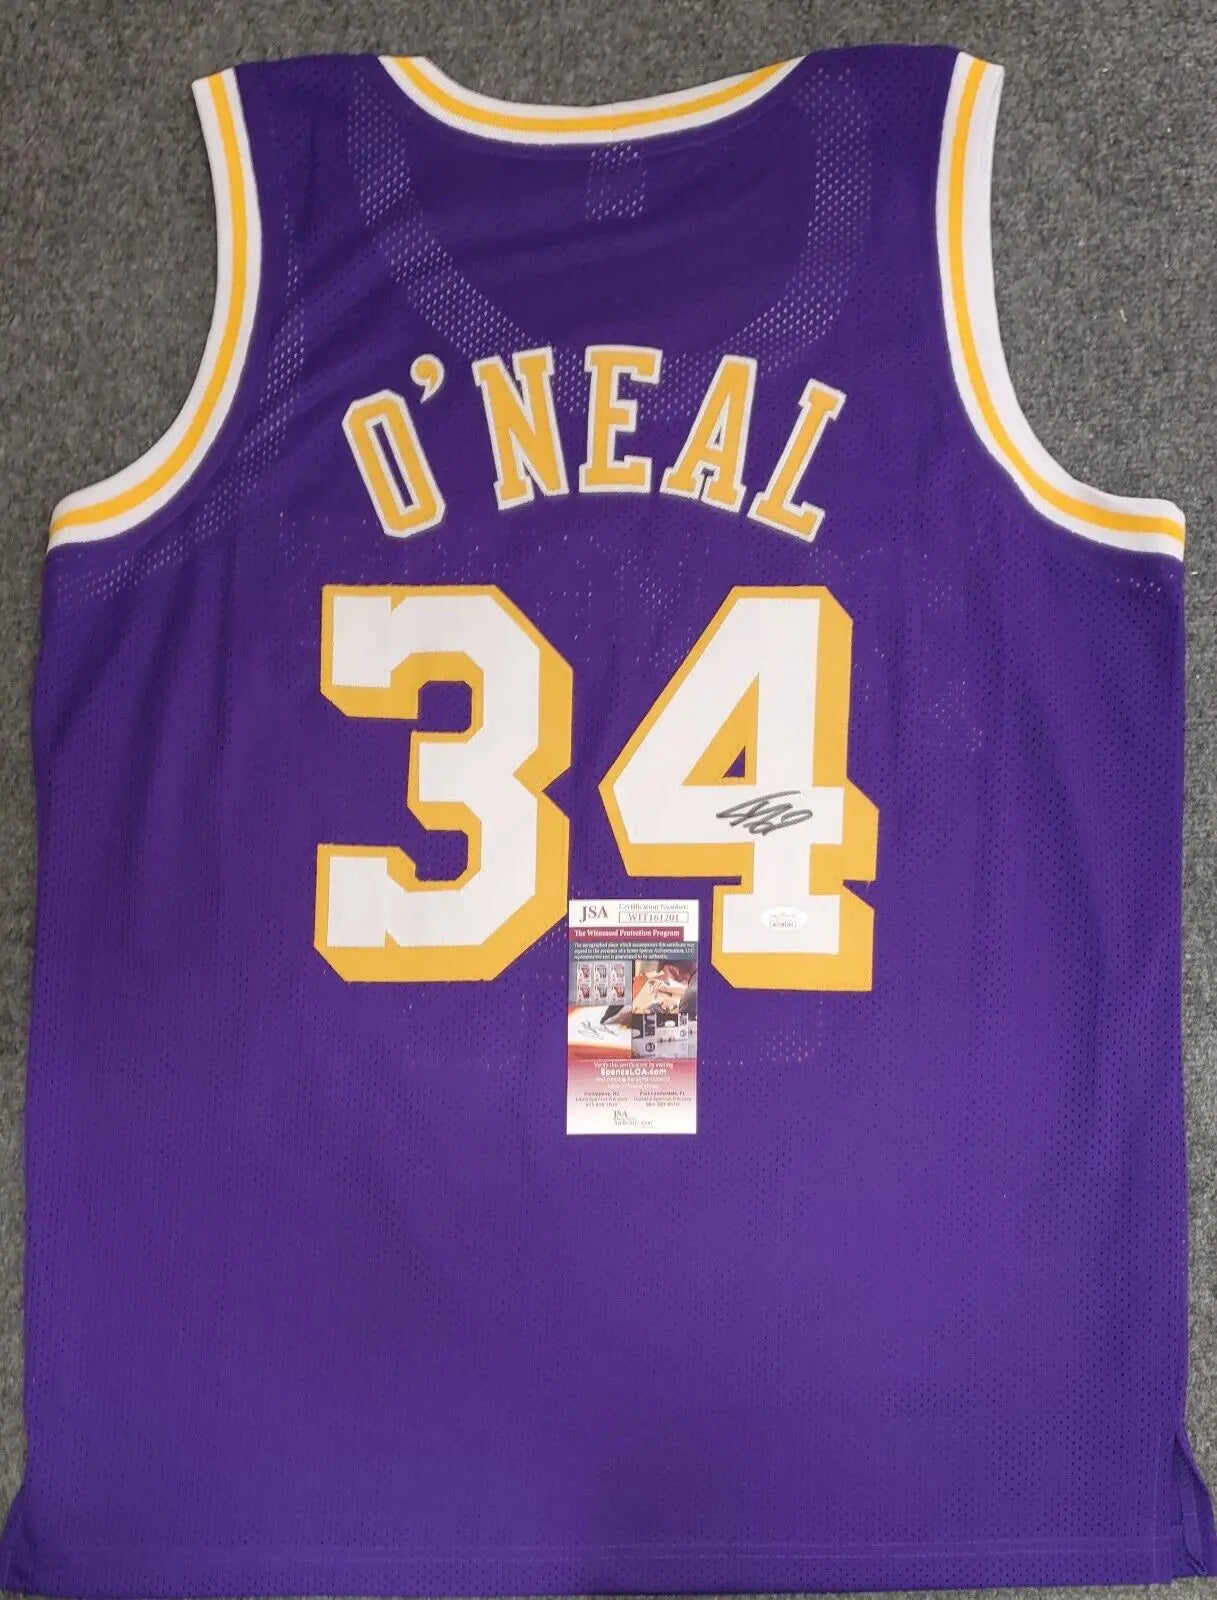 Los Angeles Lakers Shaquille O'neal Autographed Signed Jersey Jsa